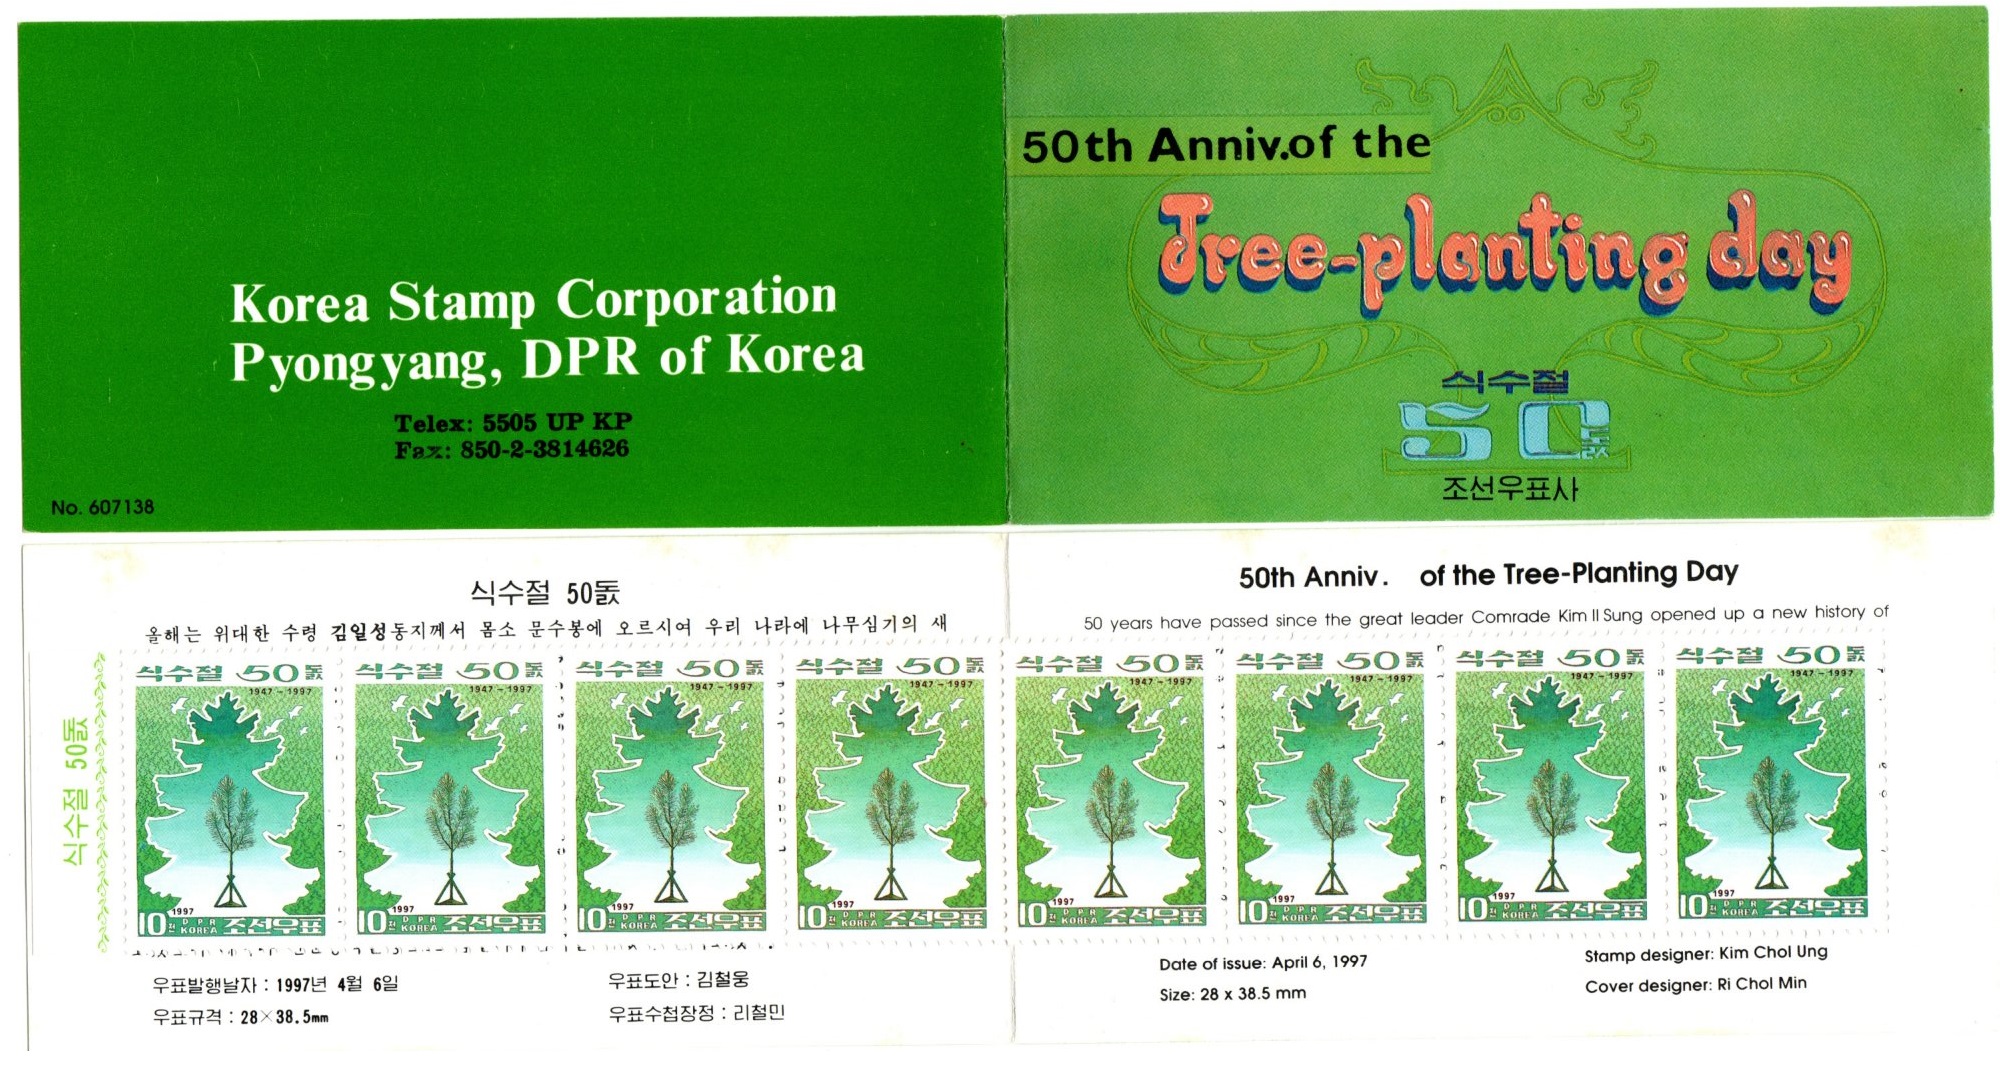 L9100, Korea "Tree Planting Reforestation Day, 50th Anni." Stamp Booklet, 1997